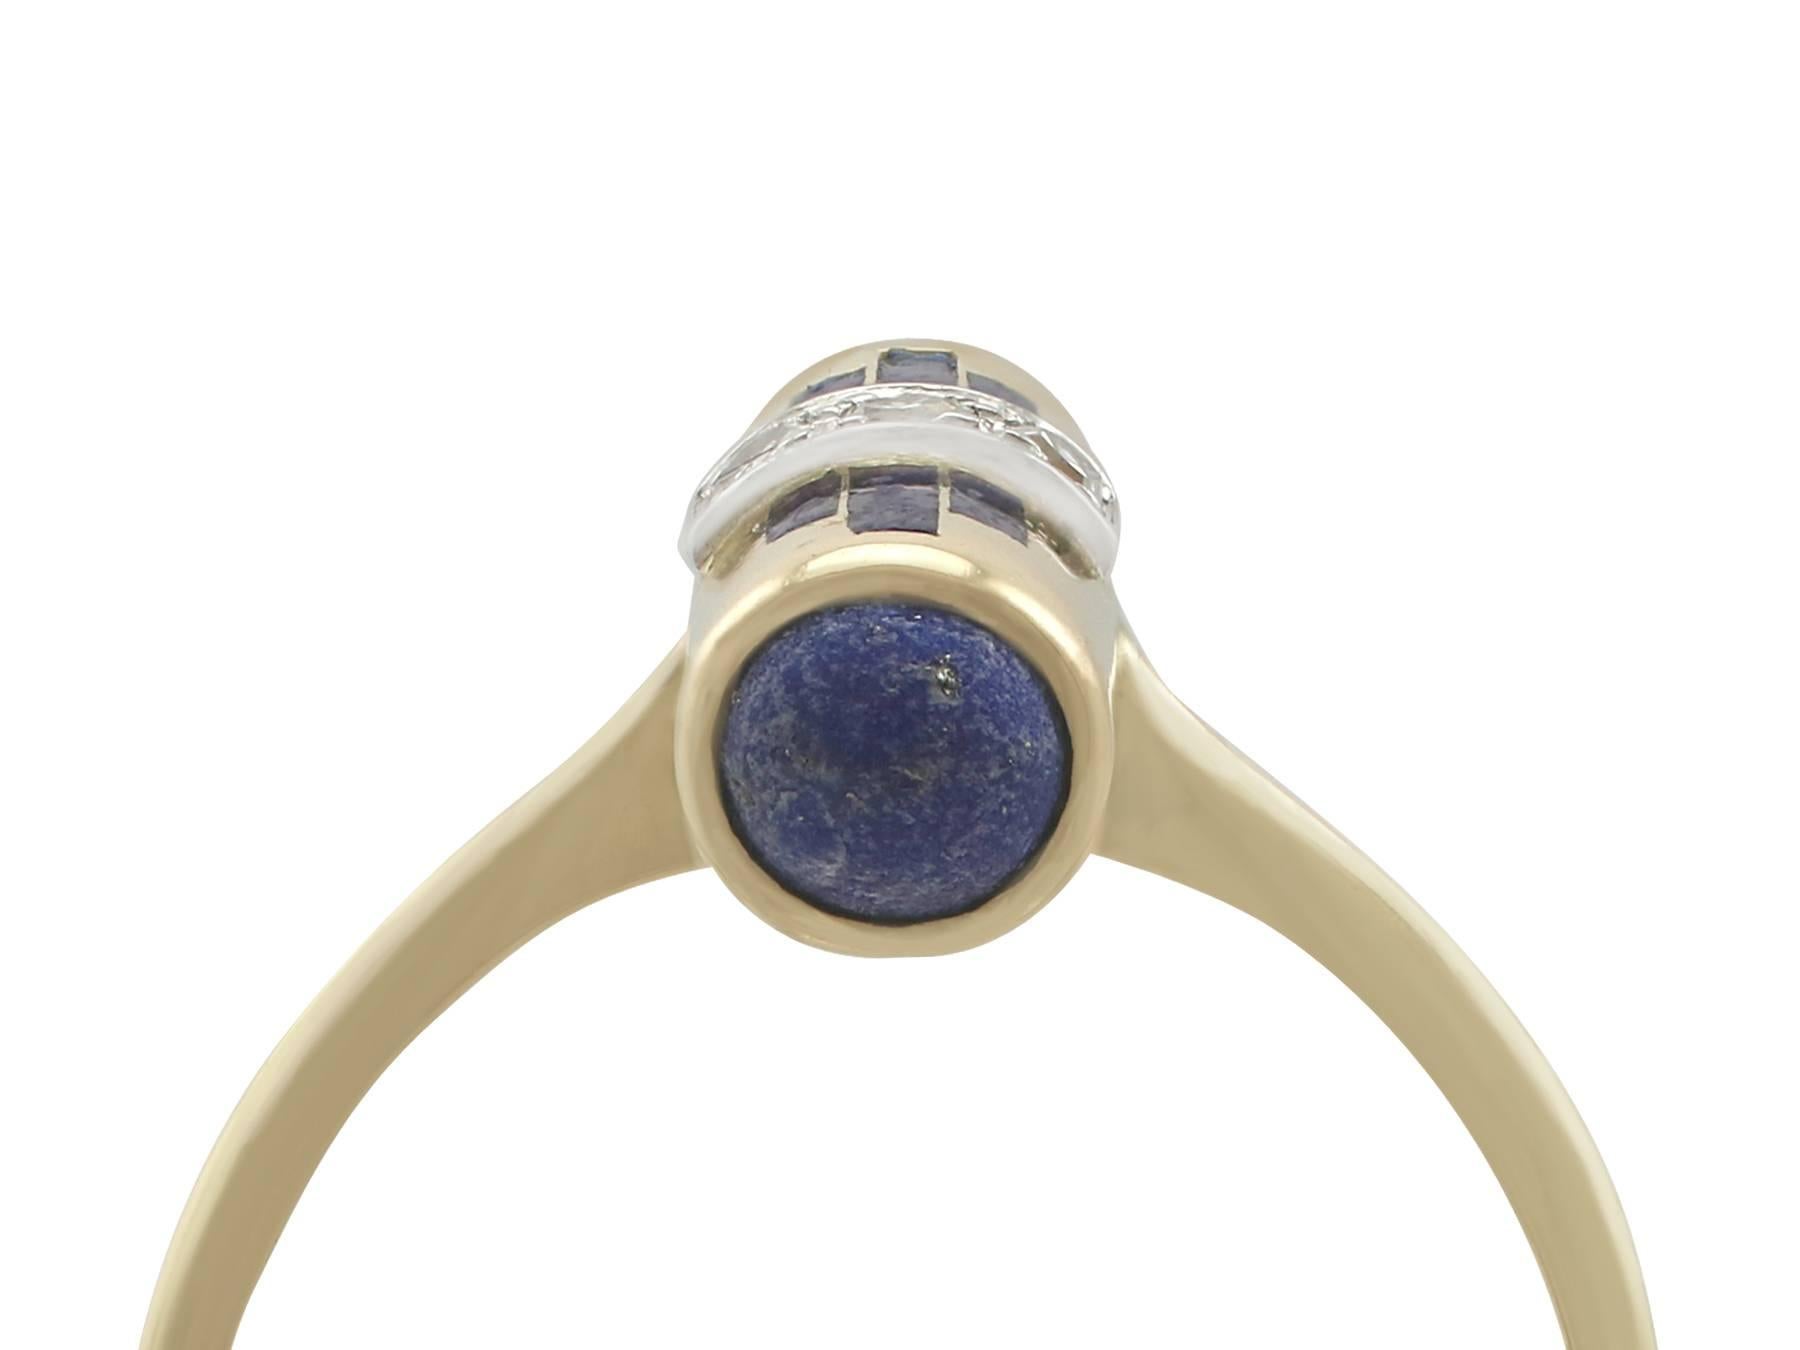 An impressive antique Art Deco lapis lazuli and 0.03 carat diamond, blue enamel and 18 karat yellow gold, platinum set dress ring; part of our diverse gemstone jewelry collections

This fine and impressive lapis lazuli ring has been crafted in 18k